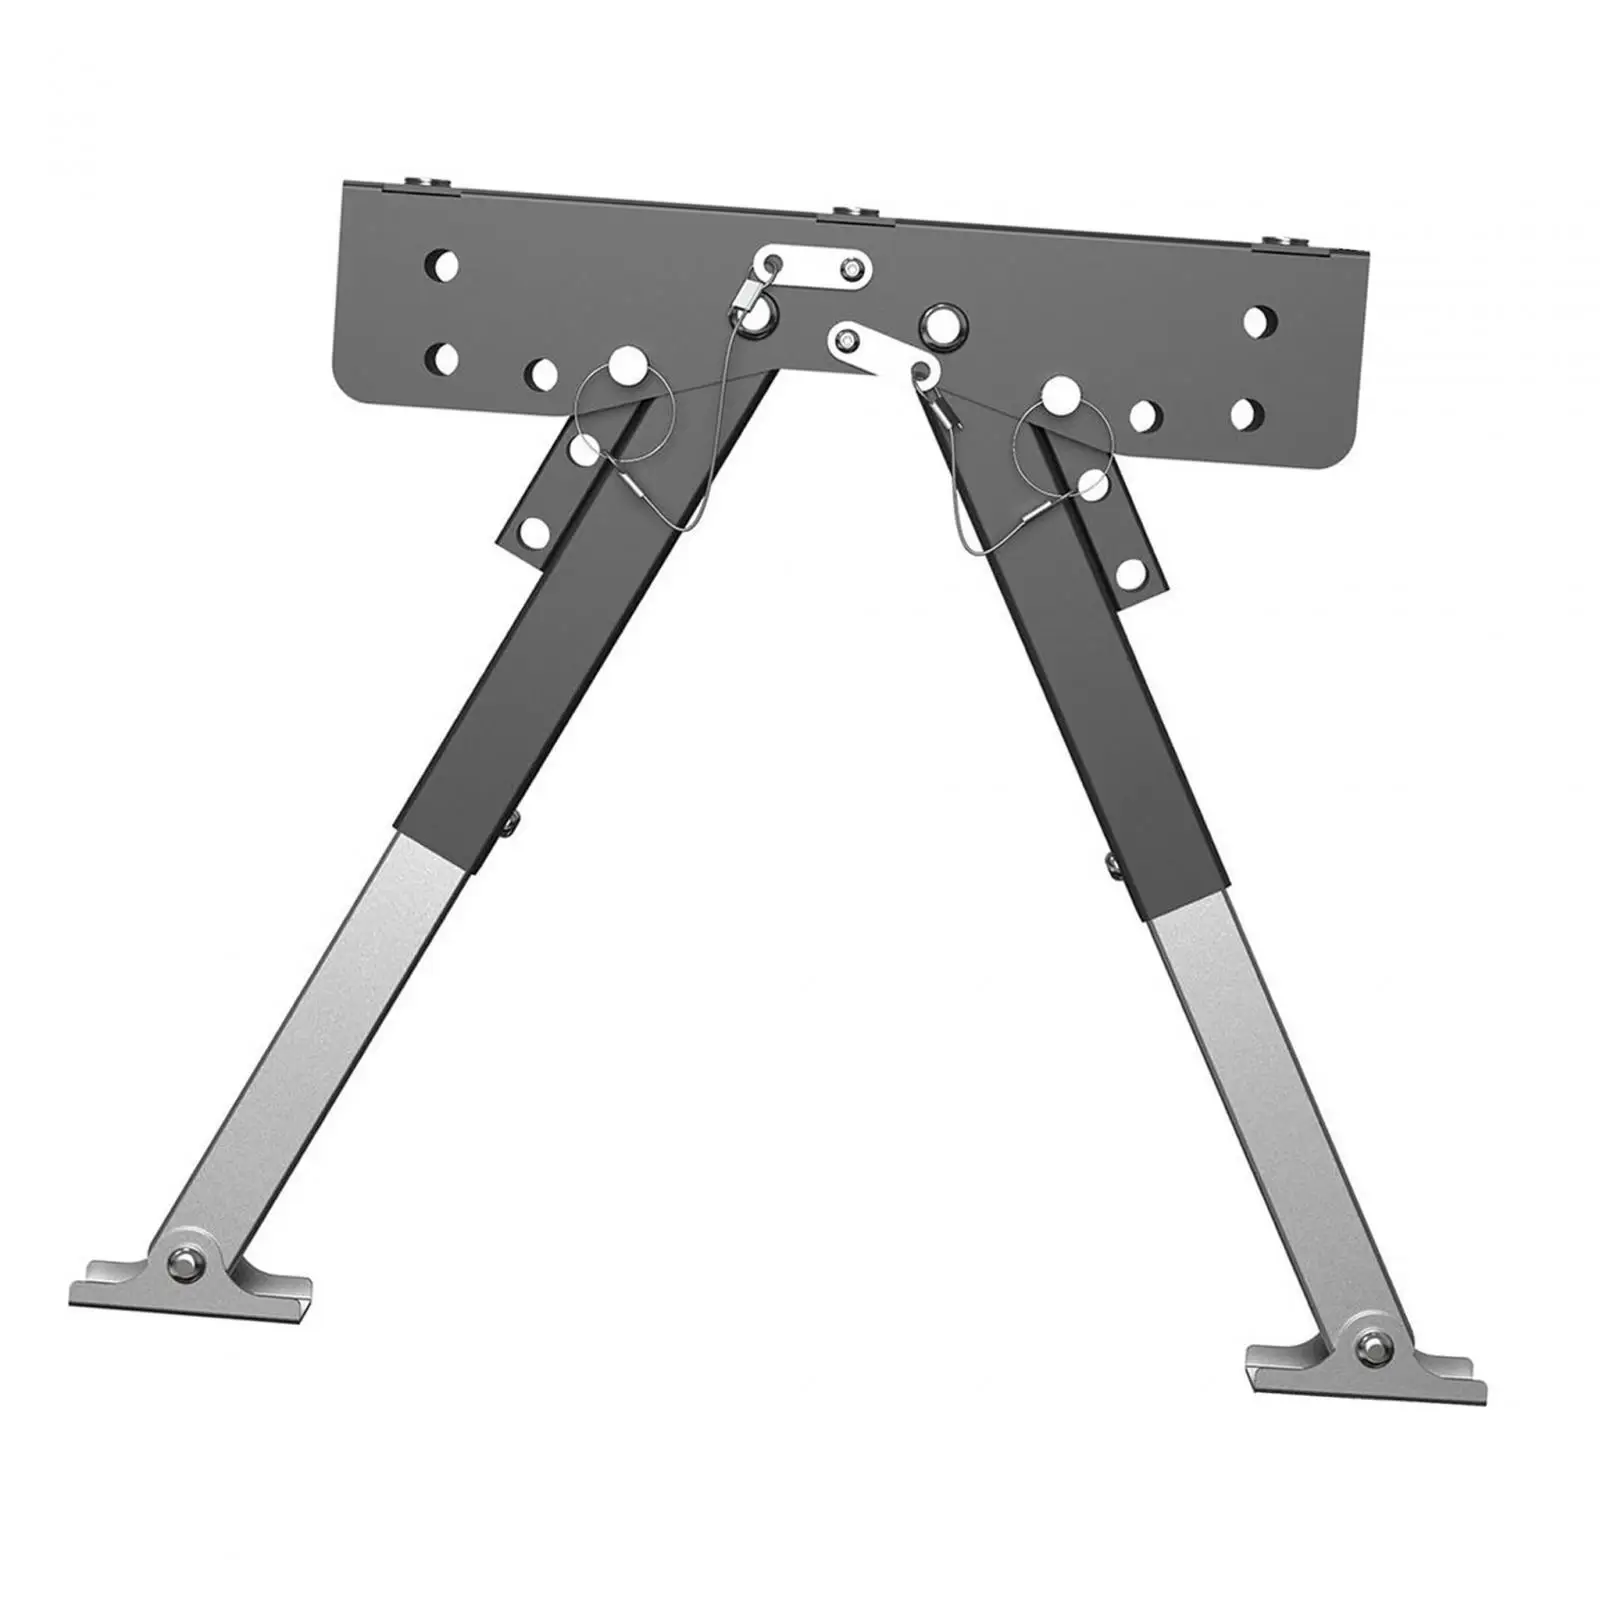 RV Step Stabilizer Foldable Quickly and Easily Adjust Height RV Accessories